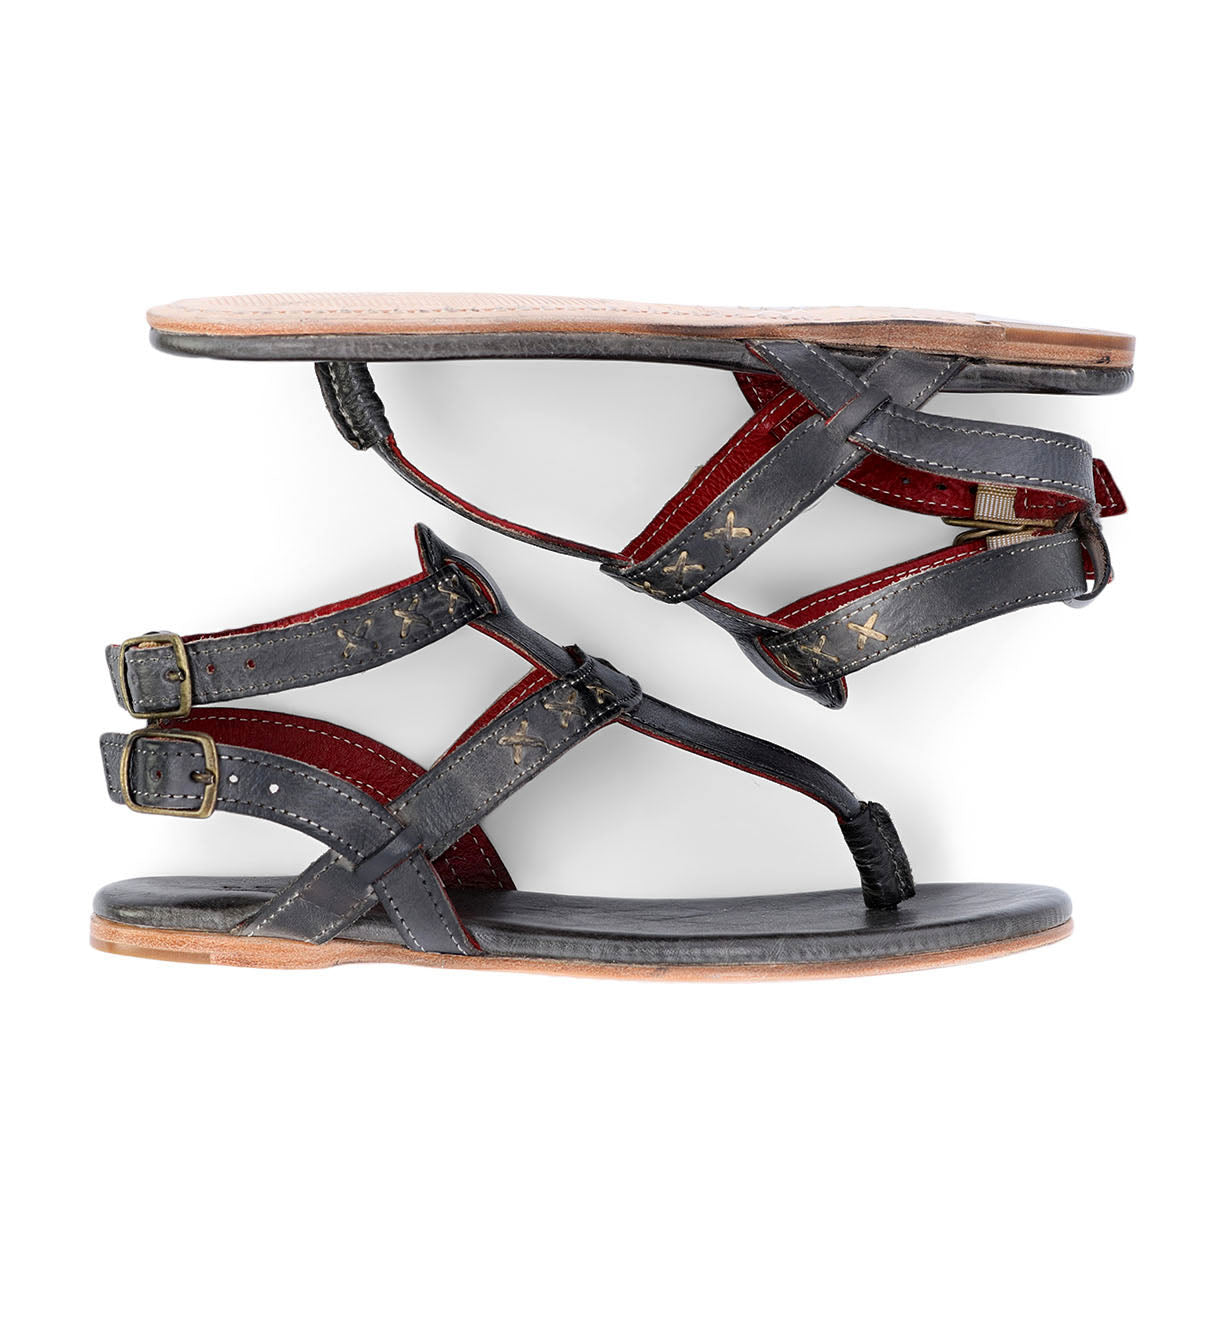 A pair of Moon women's leather sandals with red straps by Bed Stu.